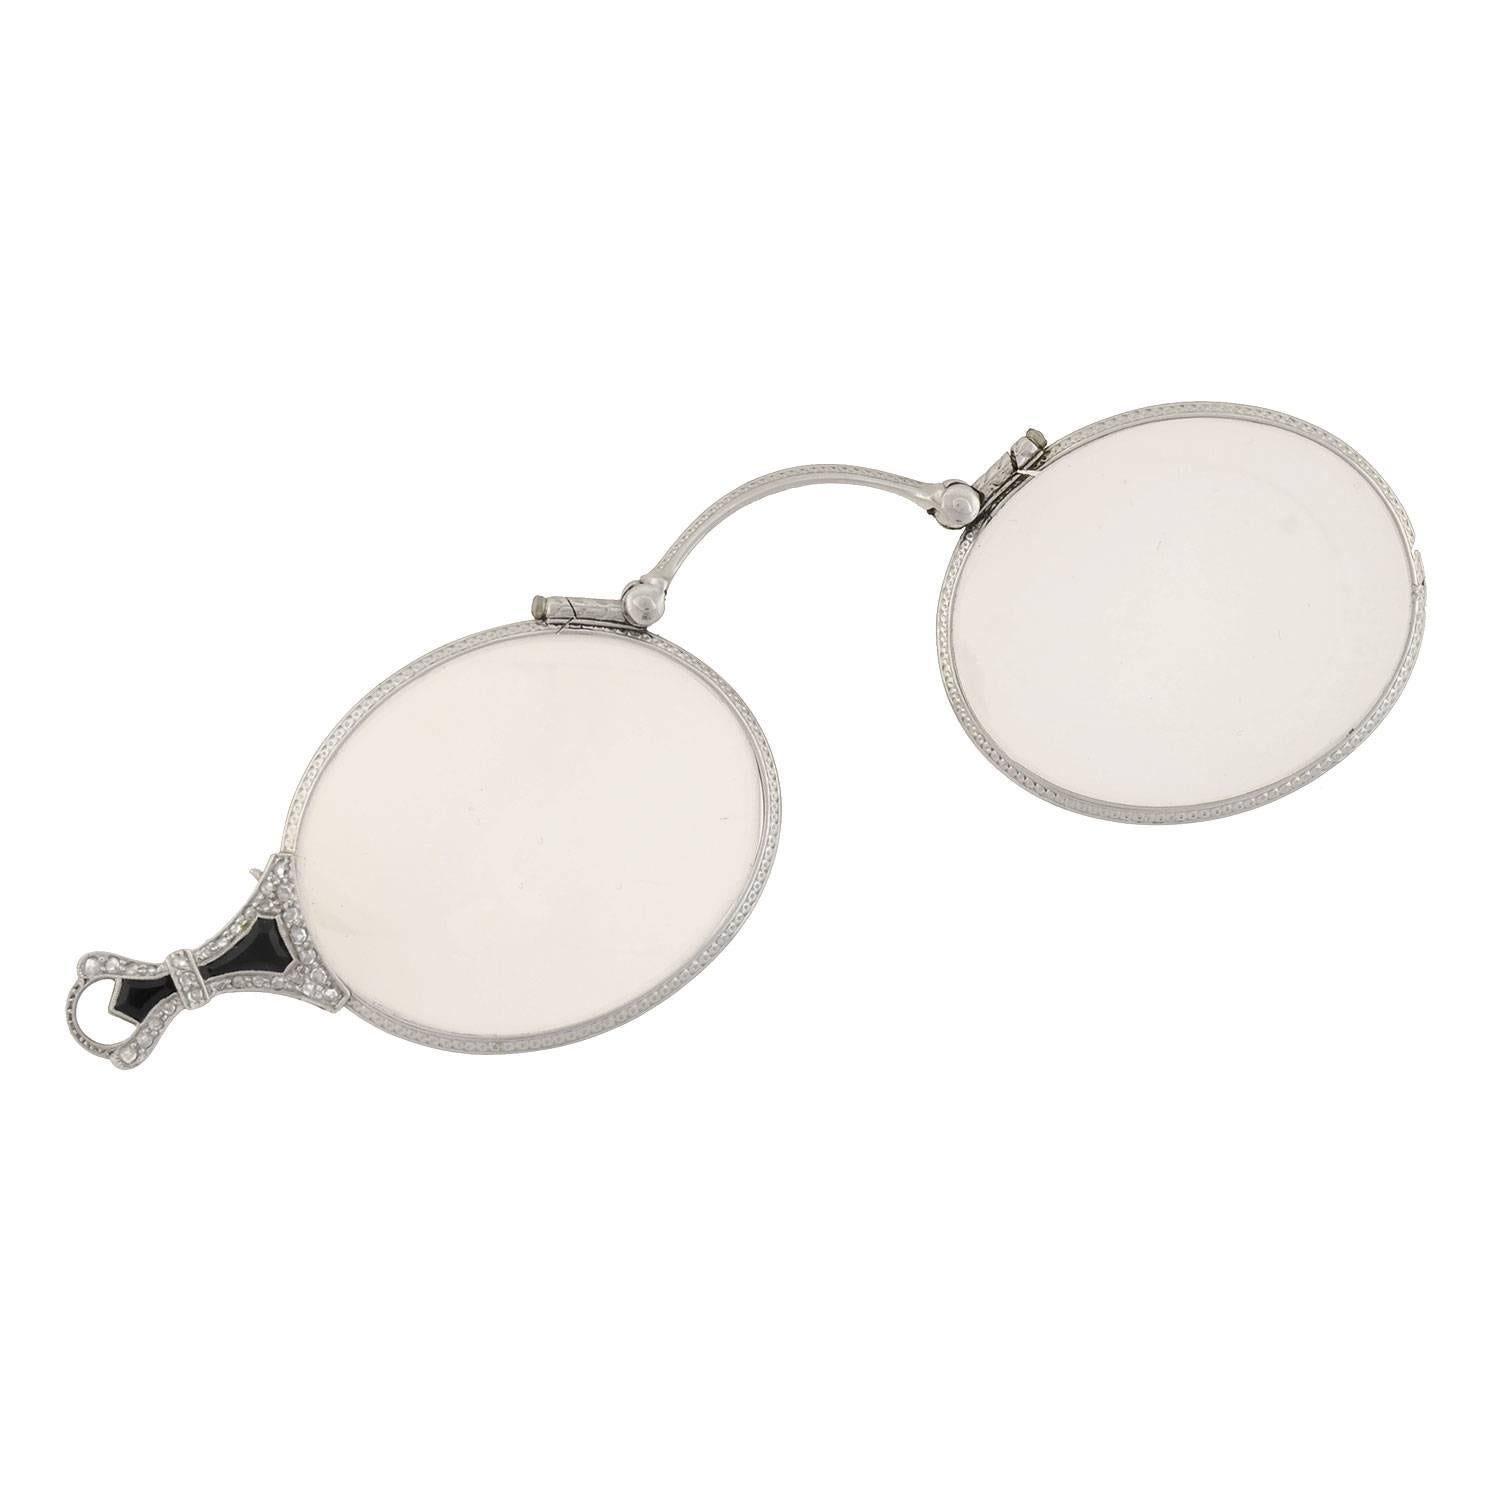 An elegant lorgnette pendant from the Art Deco (ca1920) era! This platinum pendant doubles as an expandable pair of lorgnette glasses. The glass lenses (non-prescription) are encased within platinum borders, which have been embellished with an